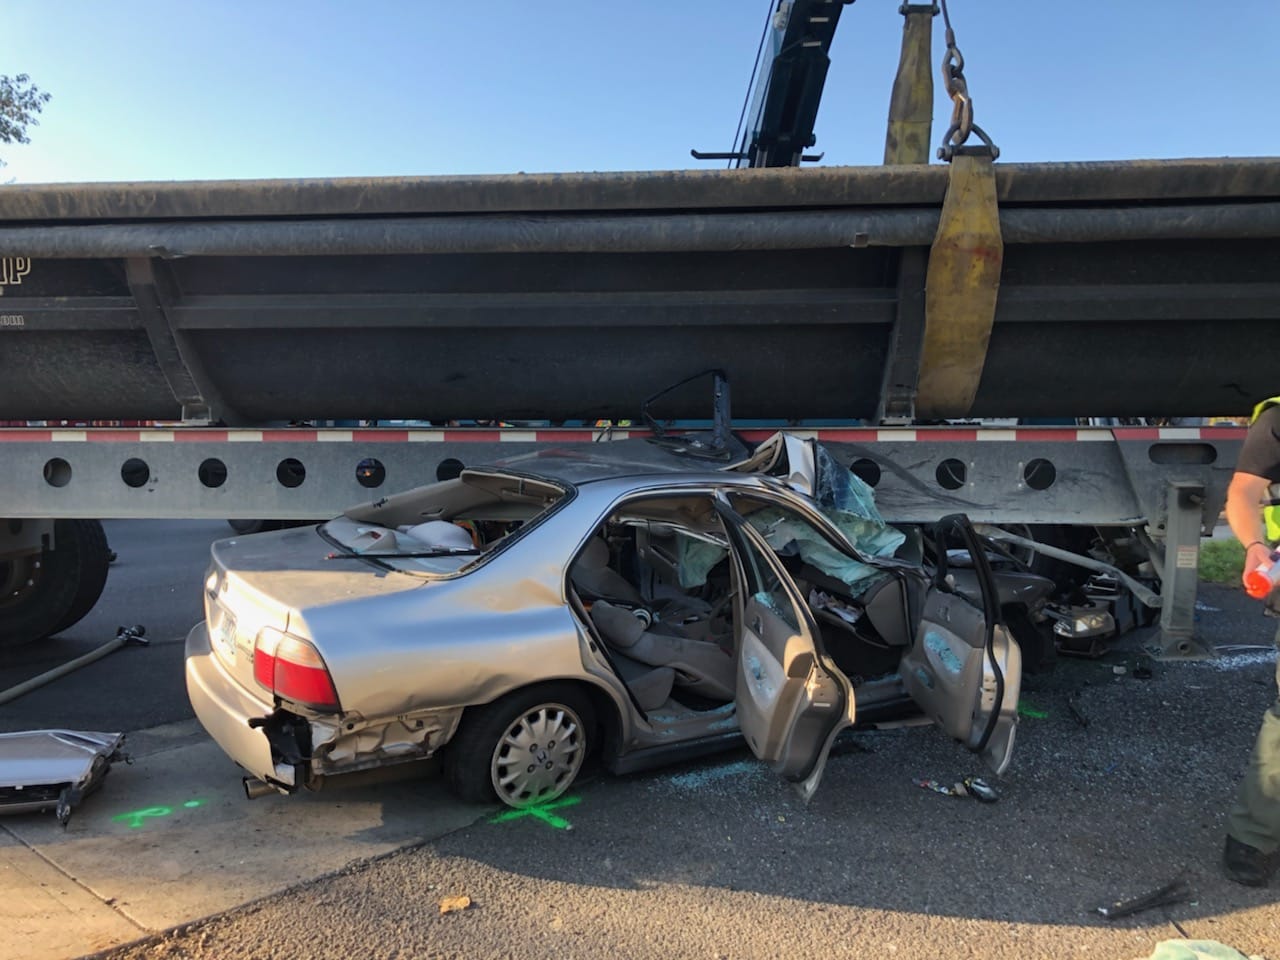 A driver is in critical condition after being pinned under a tractor-trailer Wednesday afternoon in east Vancouver.